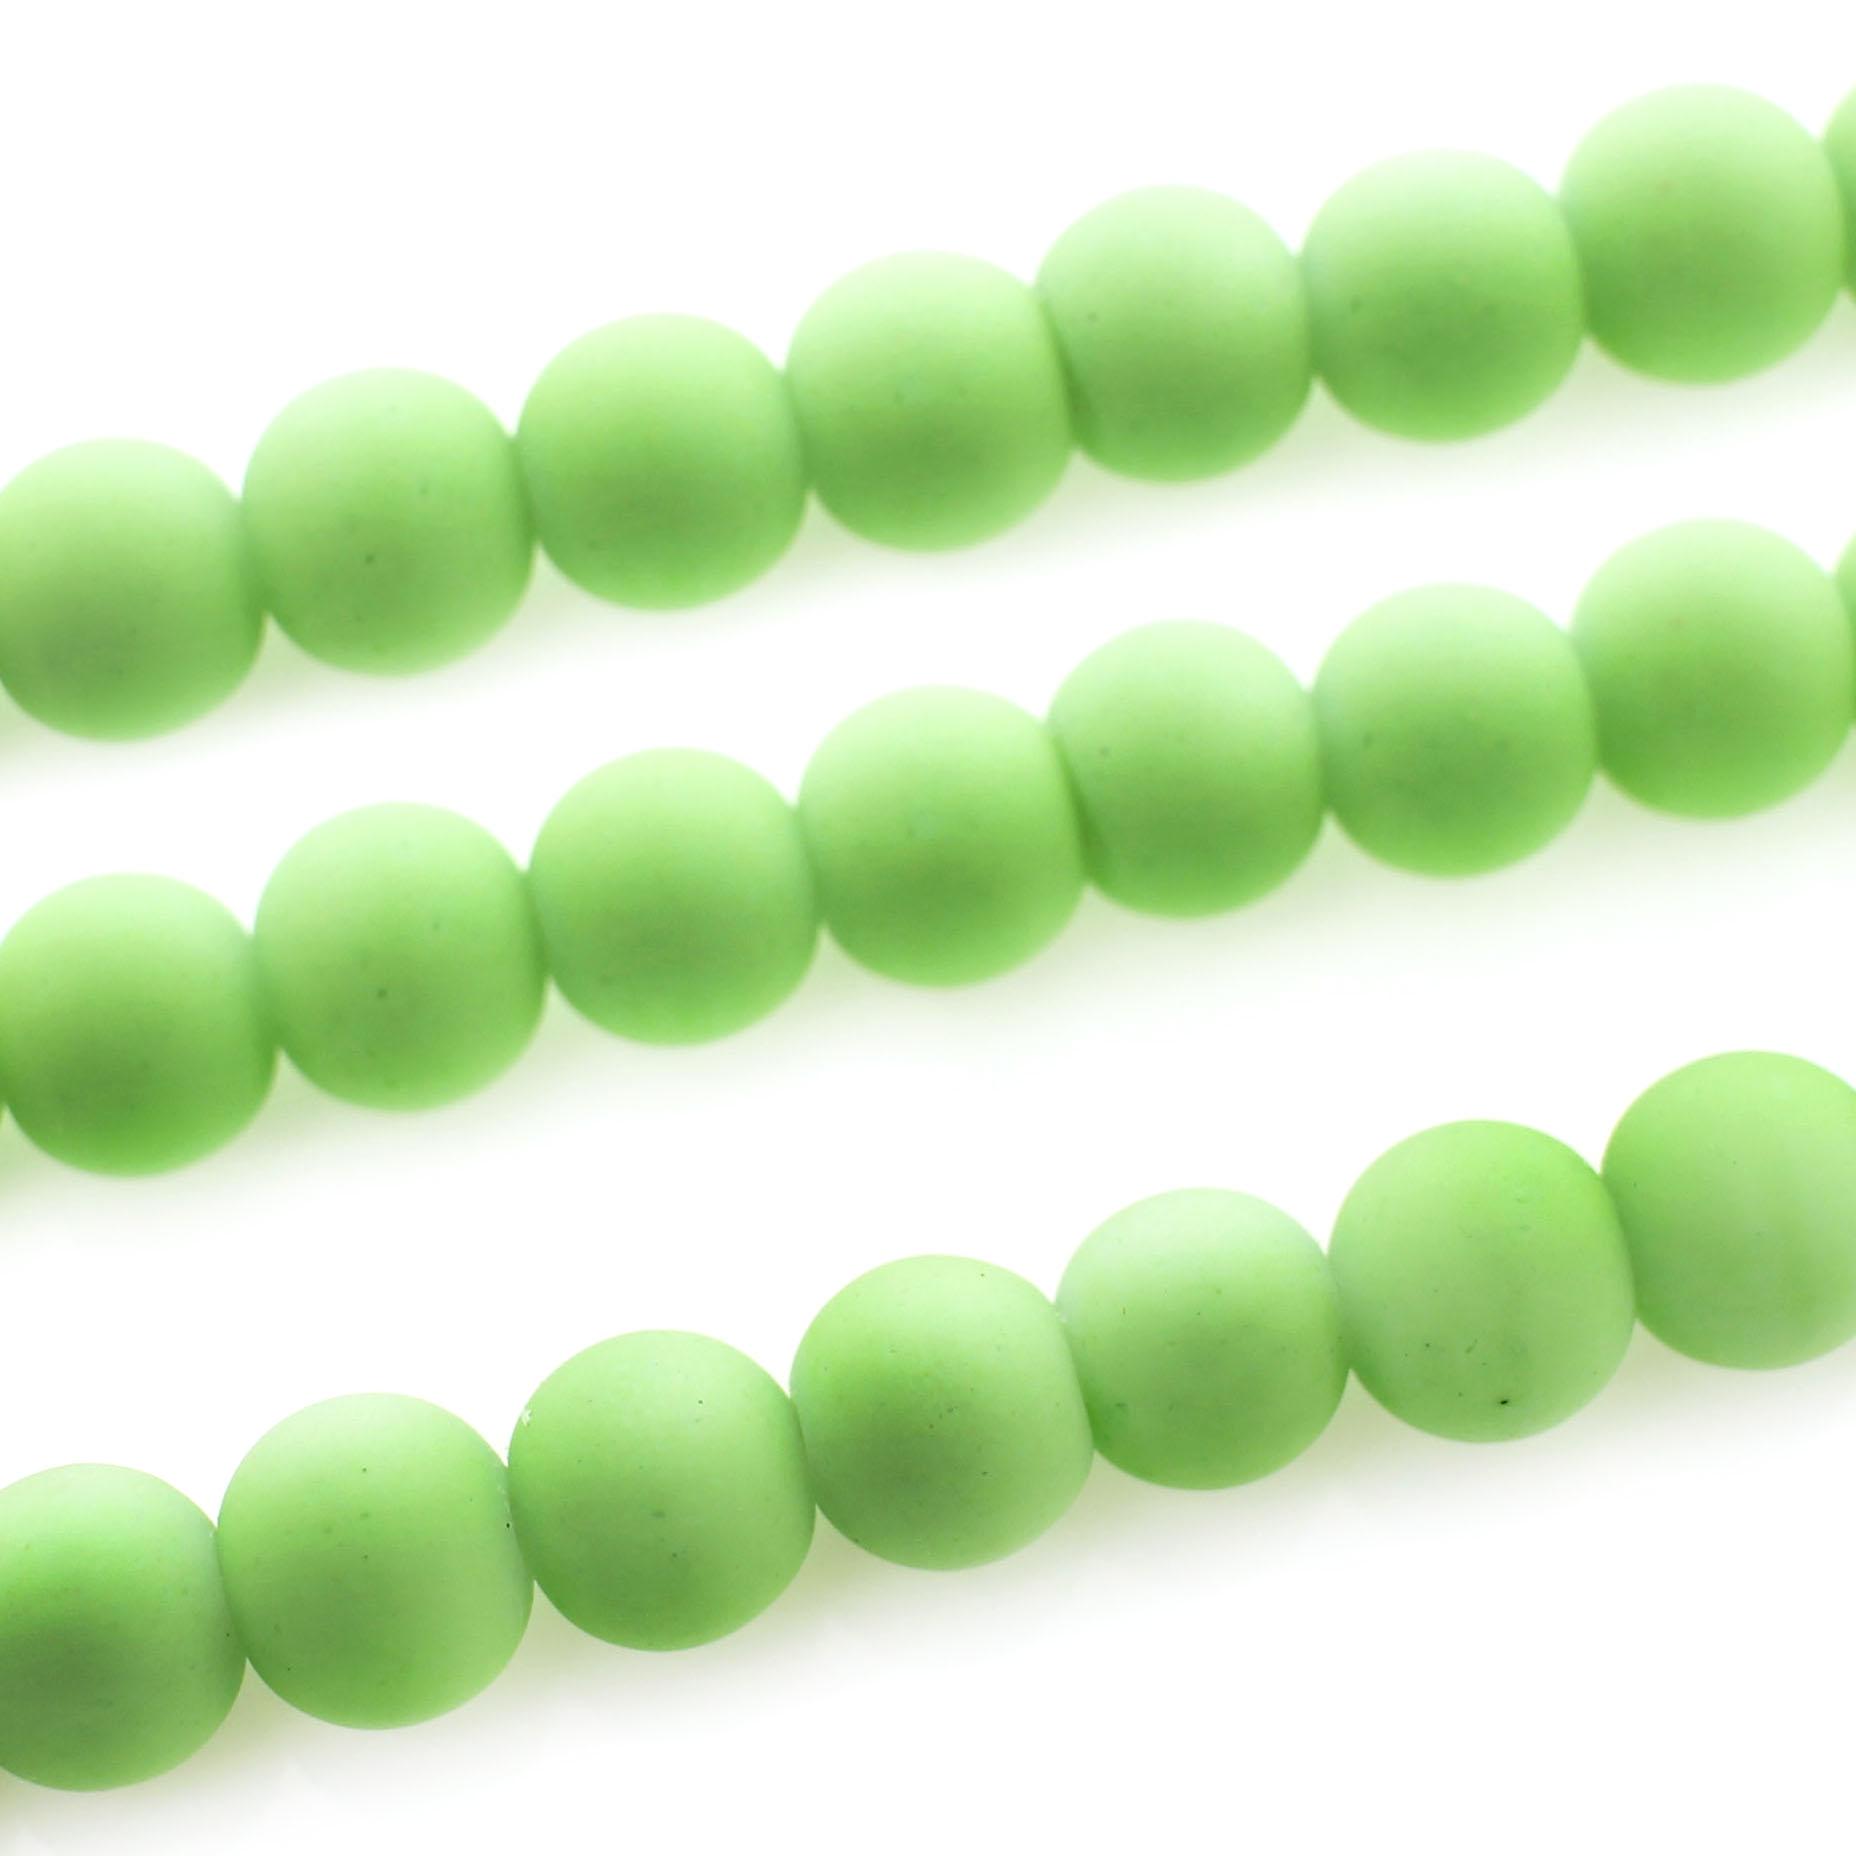 Soft Touch Glass Beads 6mm Round - Green GRADE B